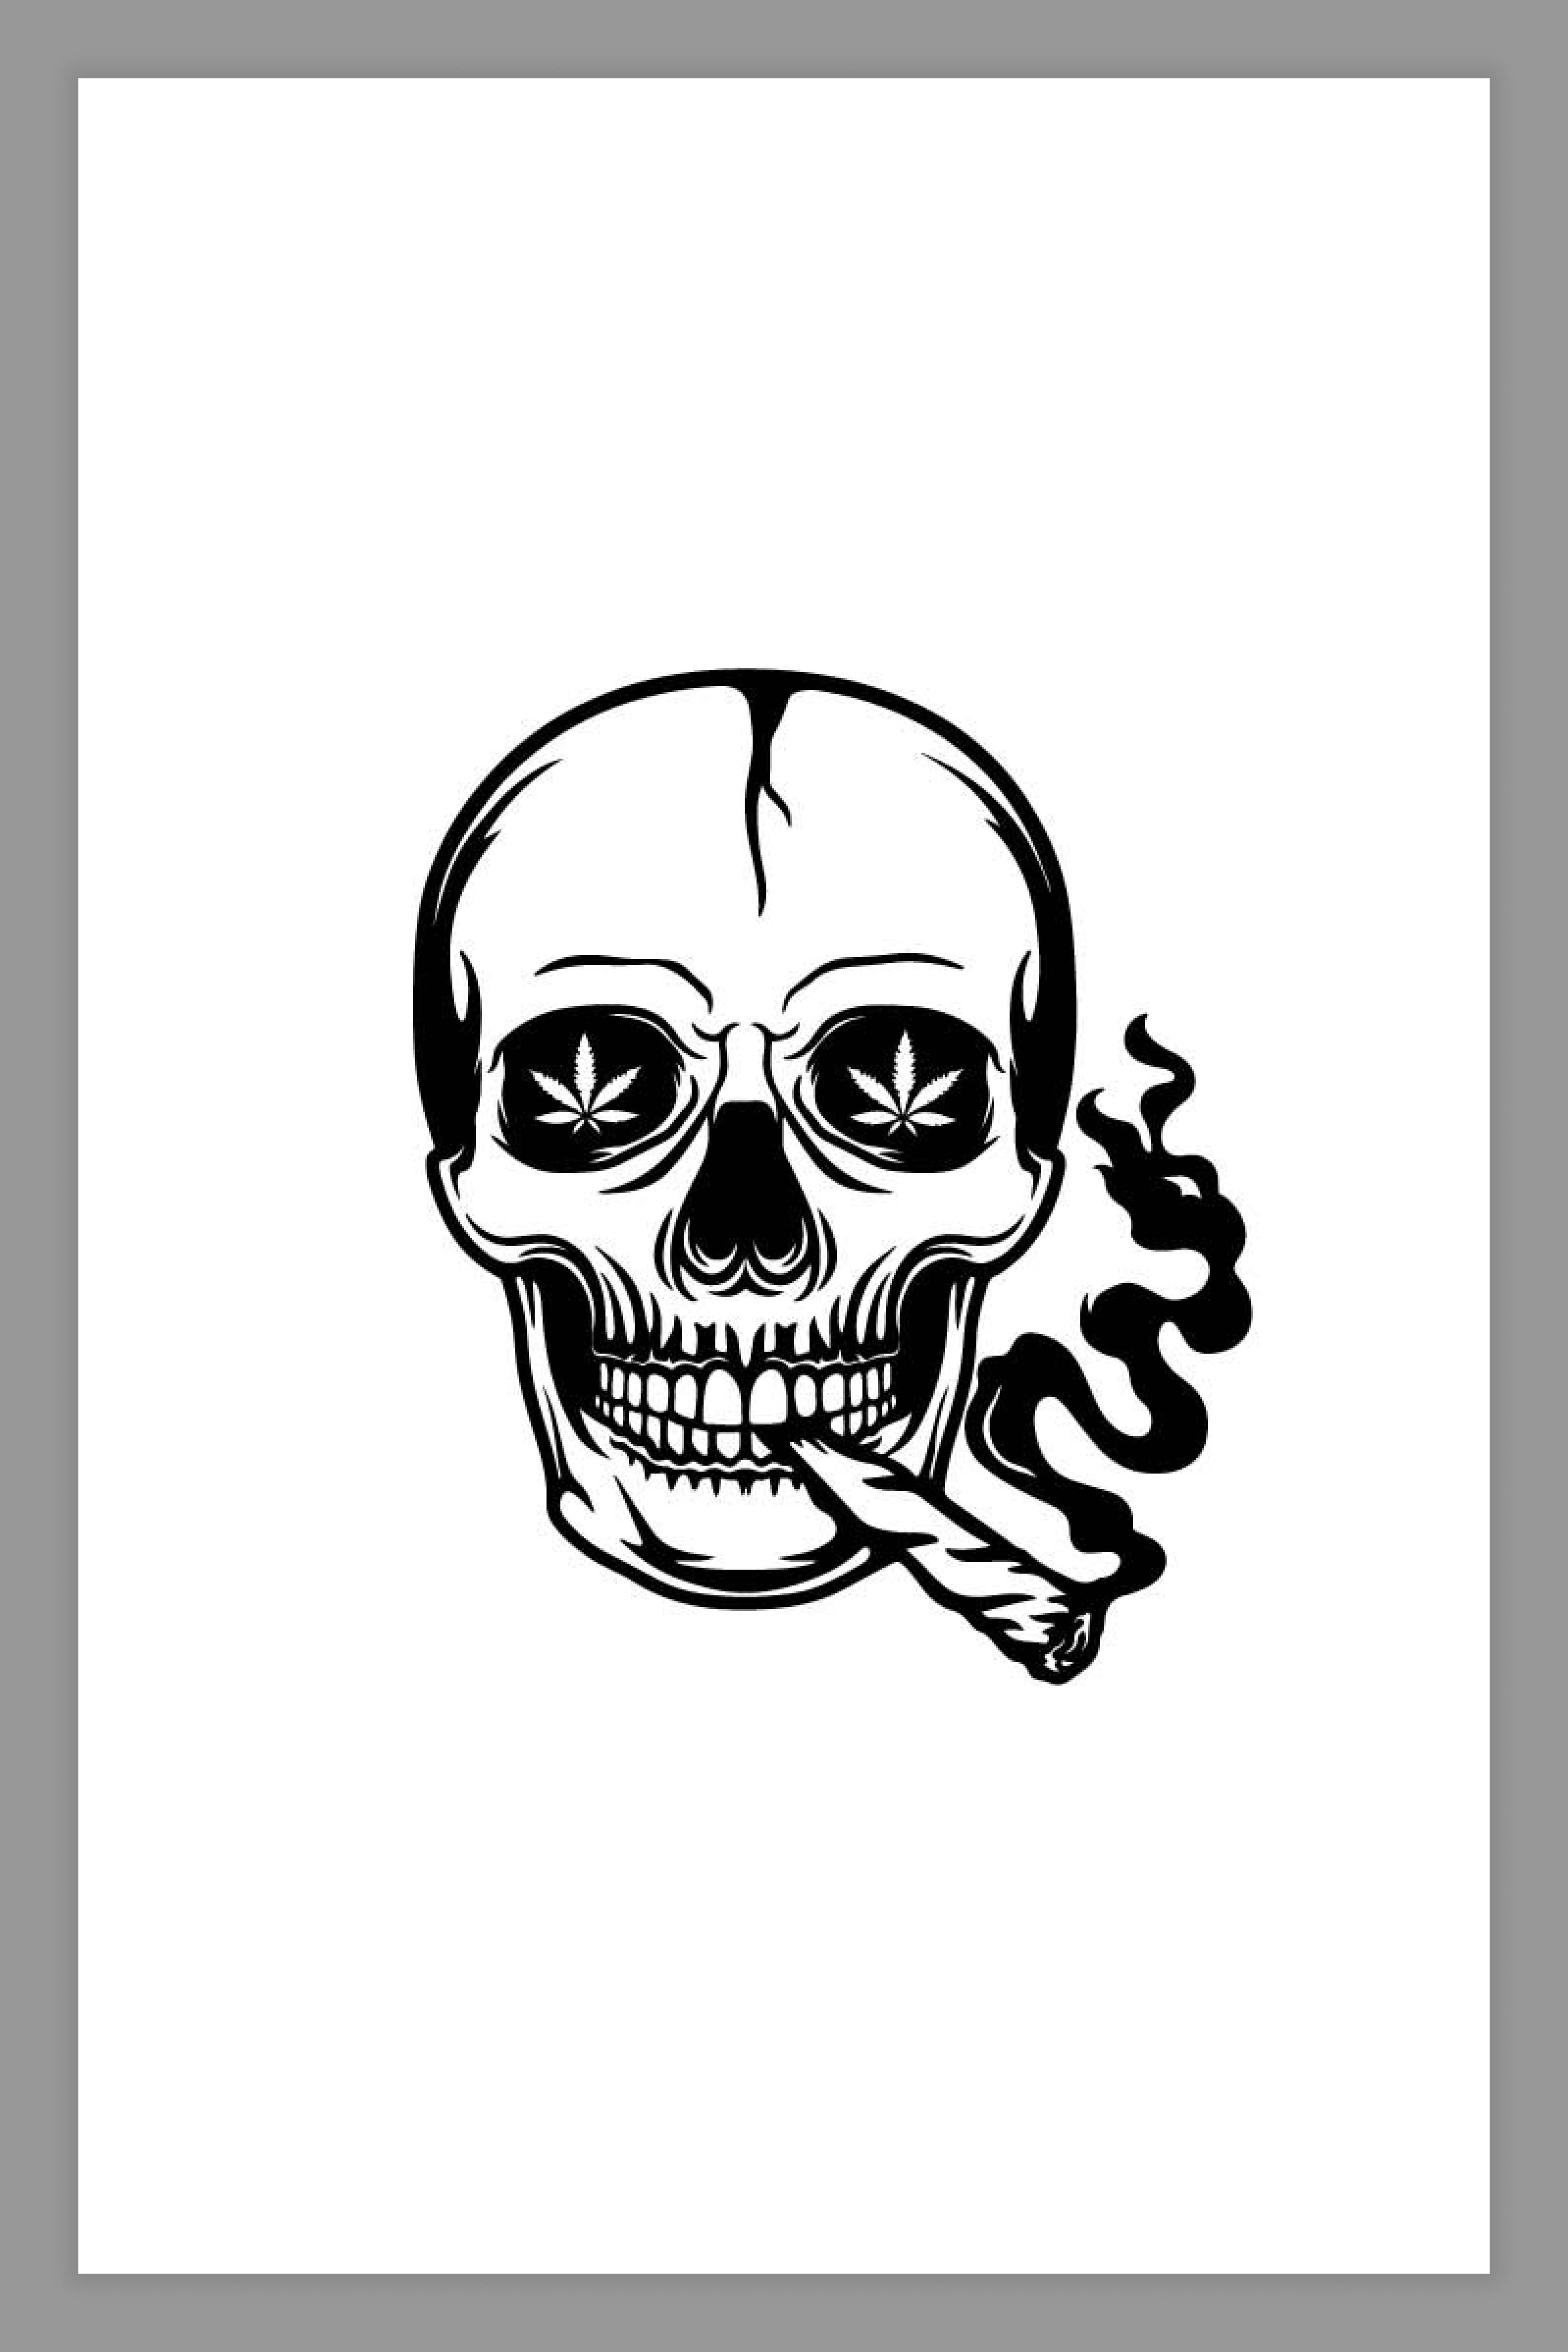 Image of a skull with a big cigarette in its mouth.